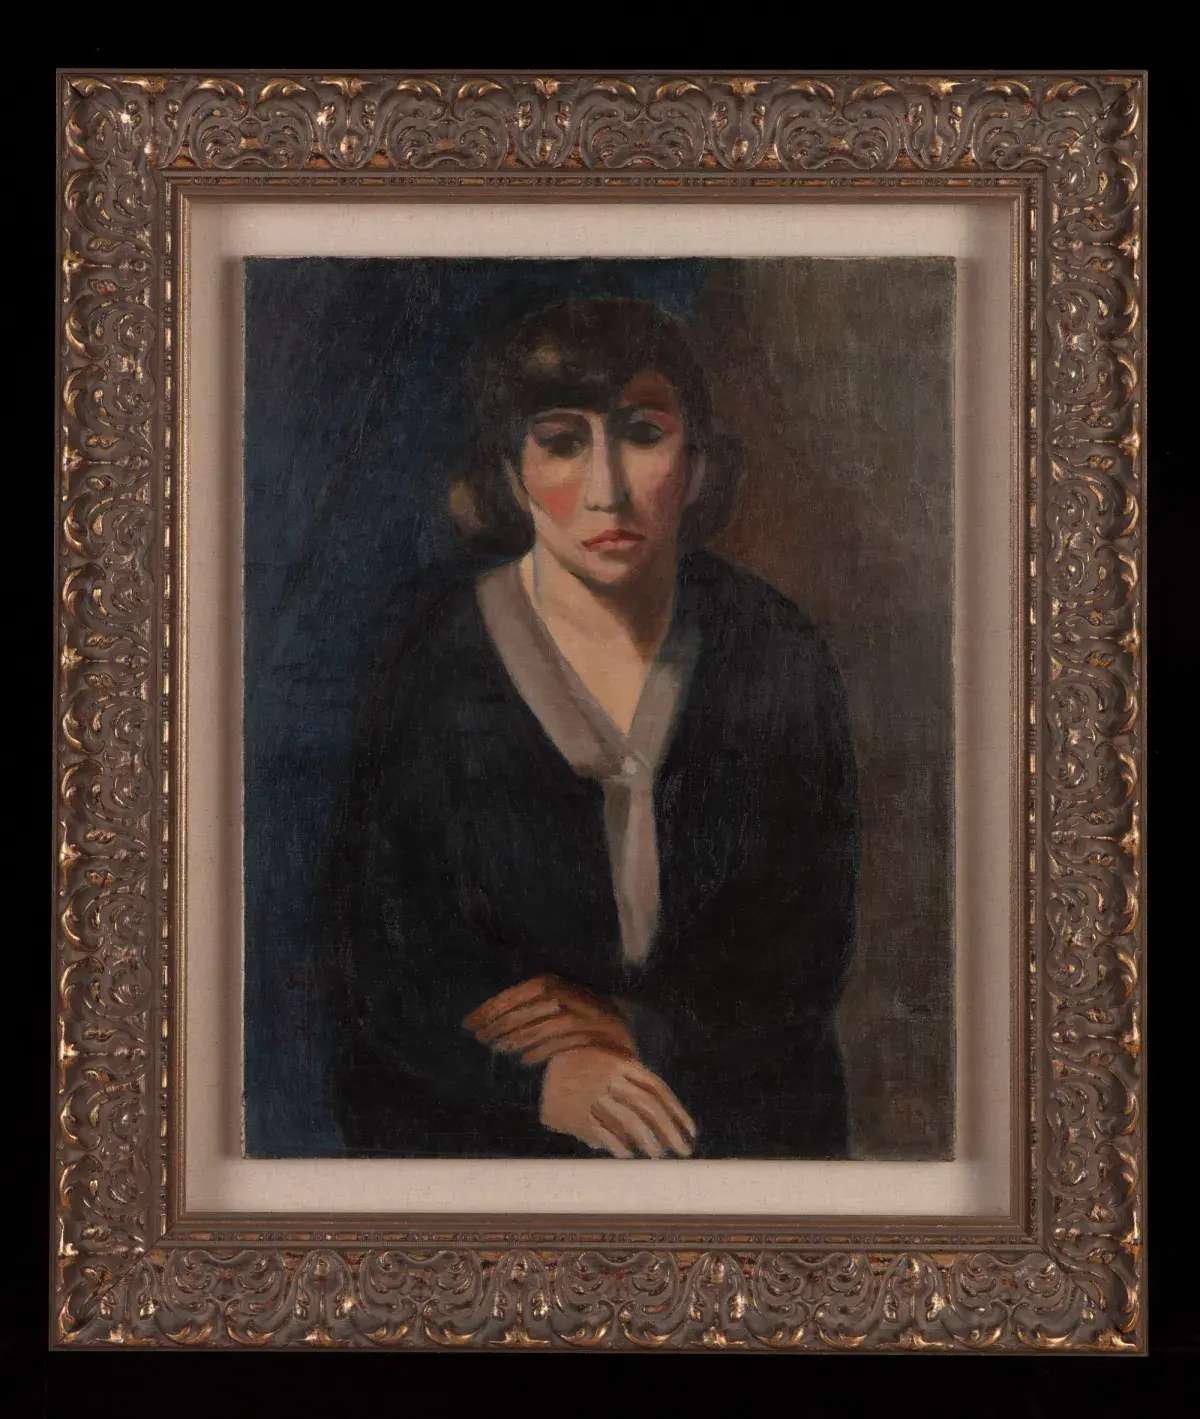 A framed portrait painting of a person looking morose.